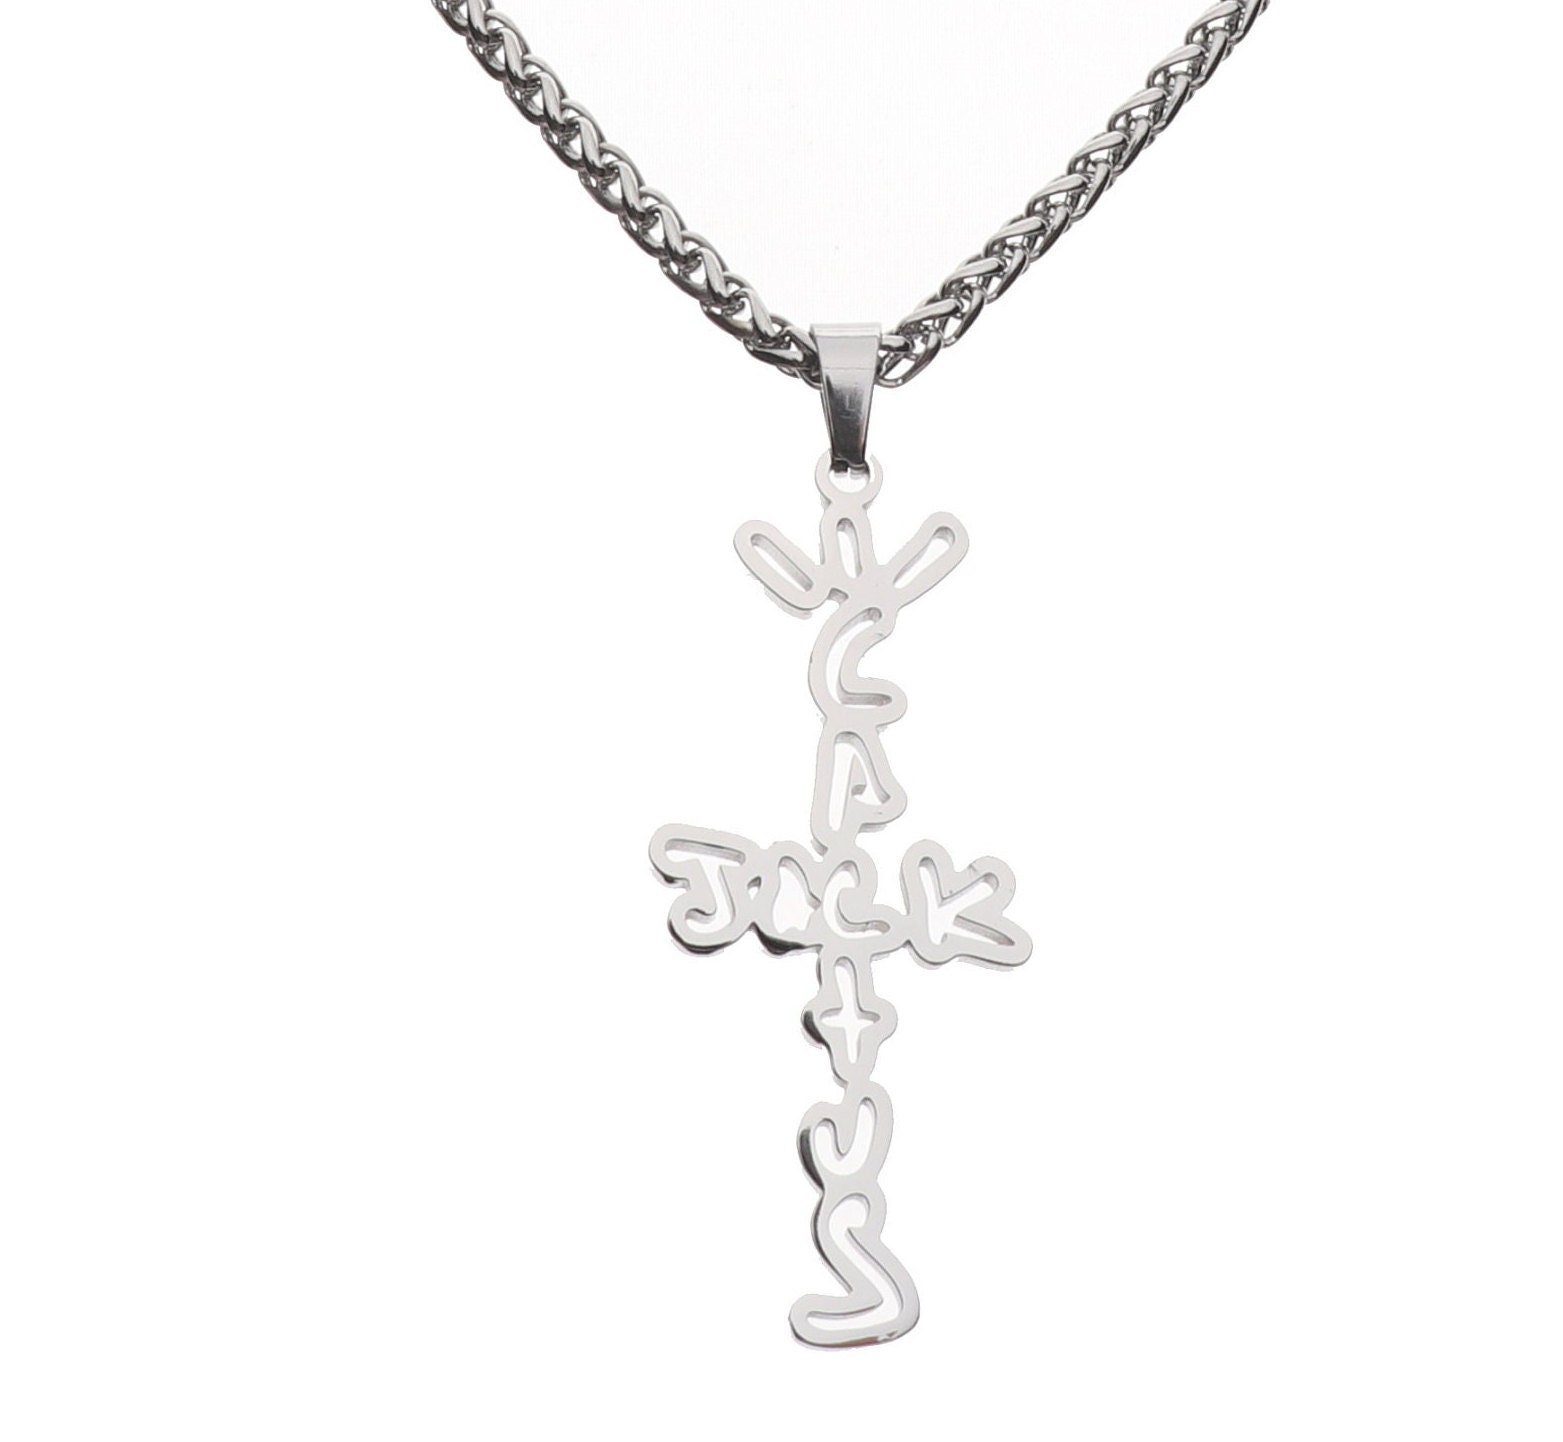 Cactus Jack Iced CZ Gold Diamond Cross Pendant Hip Hop Jewelry For Men And  Women In Gold And Silver Plating From Chengzhisuda, $10.46 | DHgate.Com